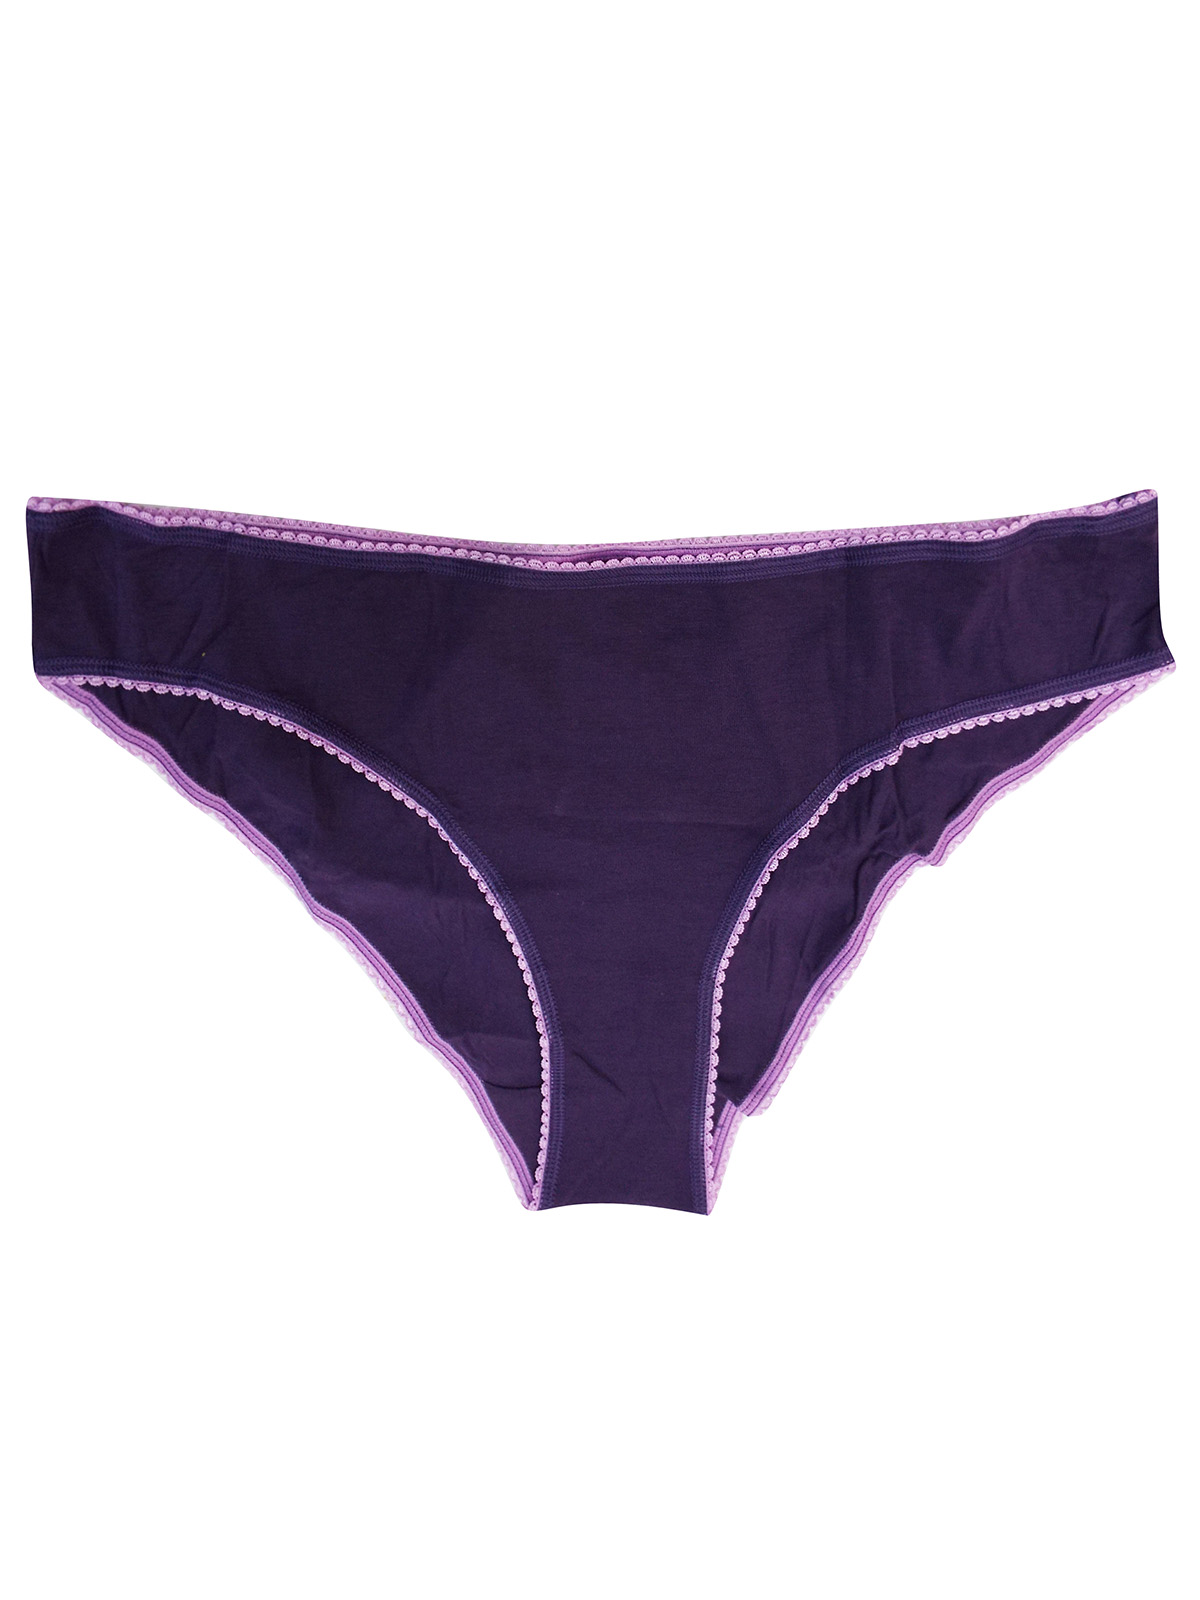 Marks and Spencer - - M&5 PLUM Scallop Lace Trim Brazilian Knickers ...